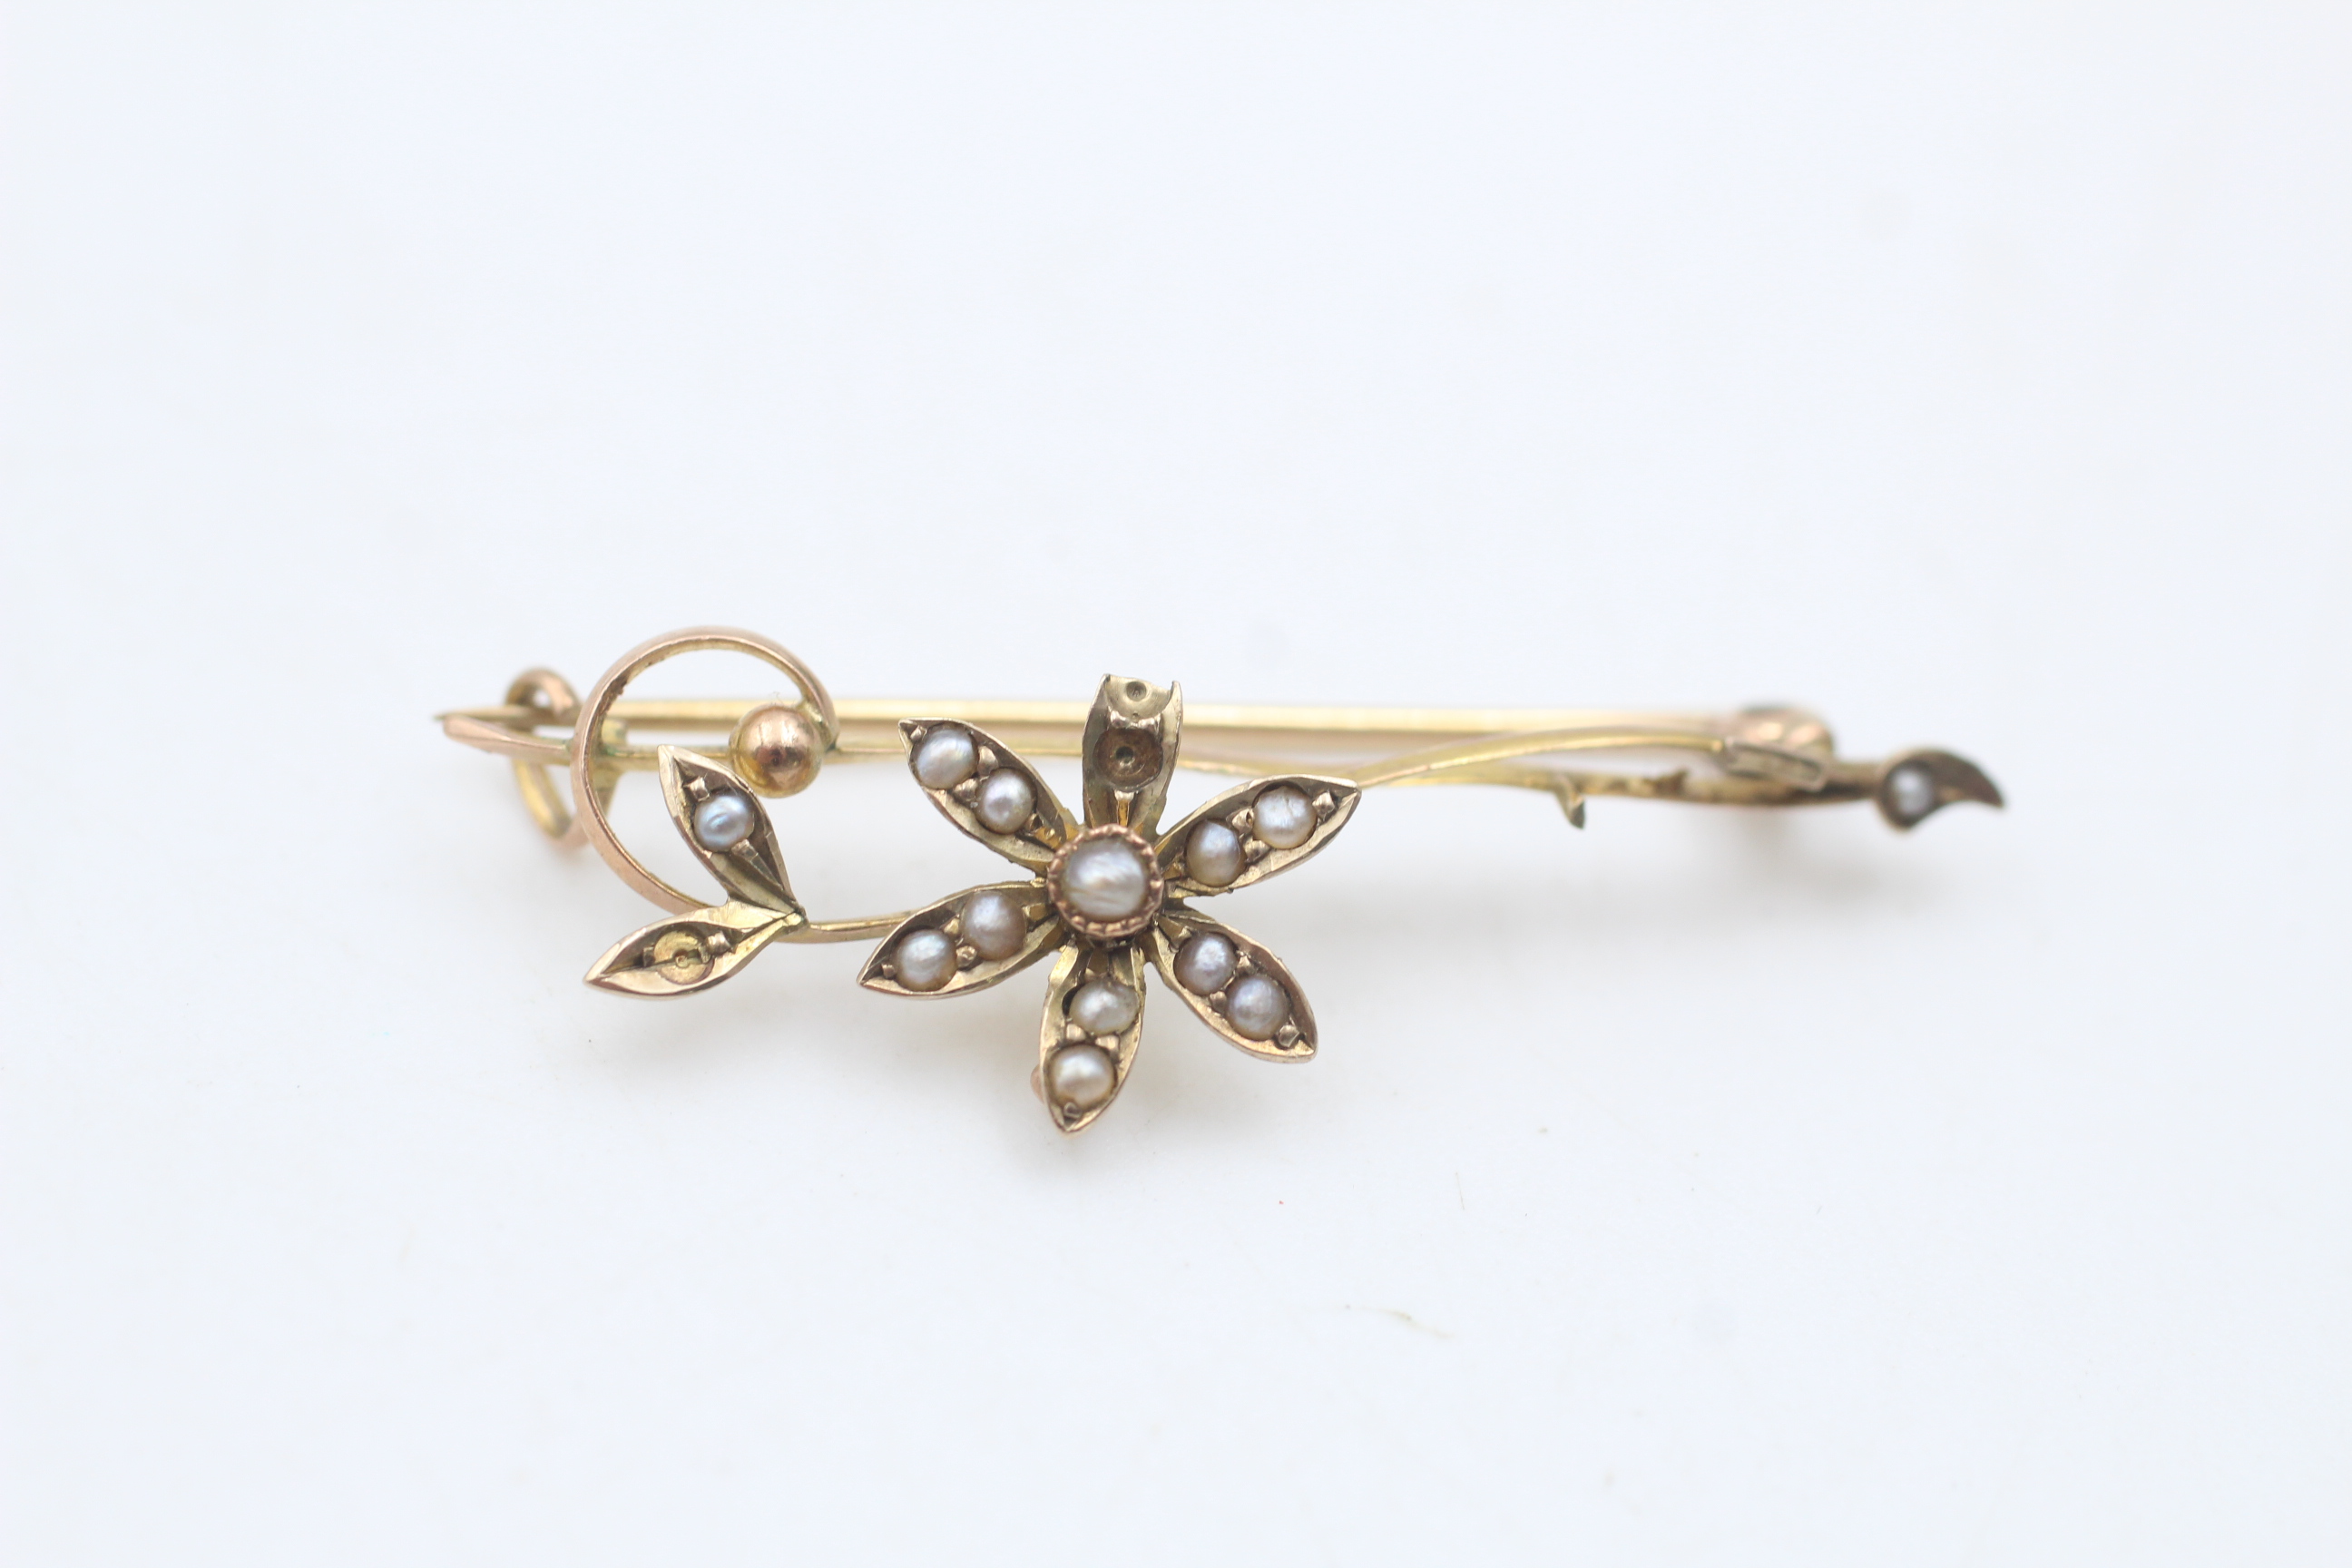 2 x 9ct gold antique swallow and floral brooches inc. seed pearl & paste - as seen (4g) - Image 3 of 4